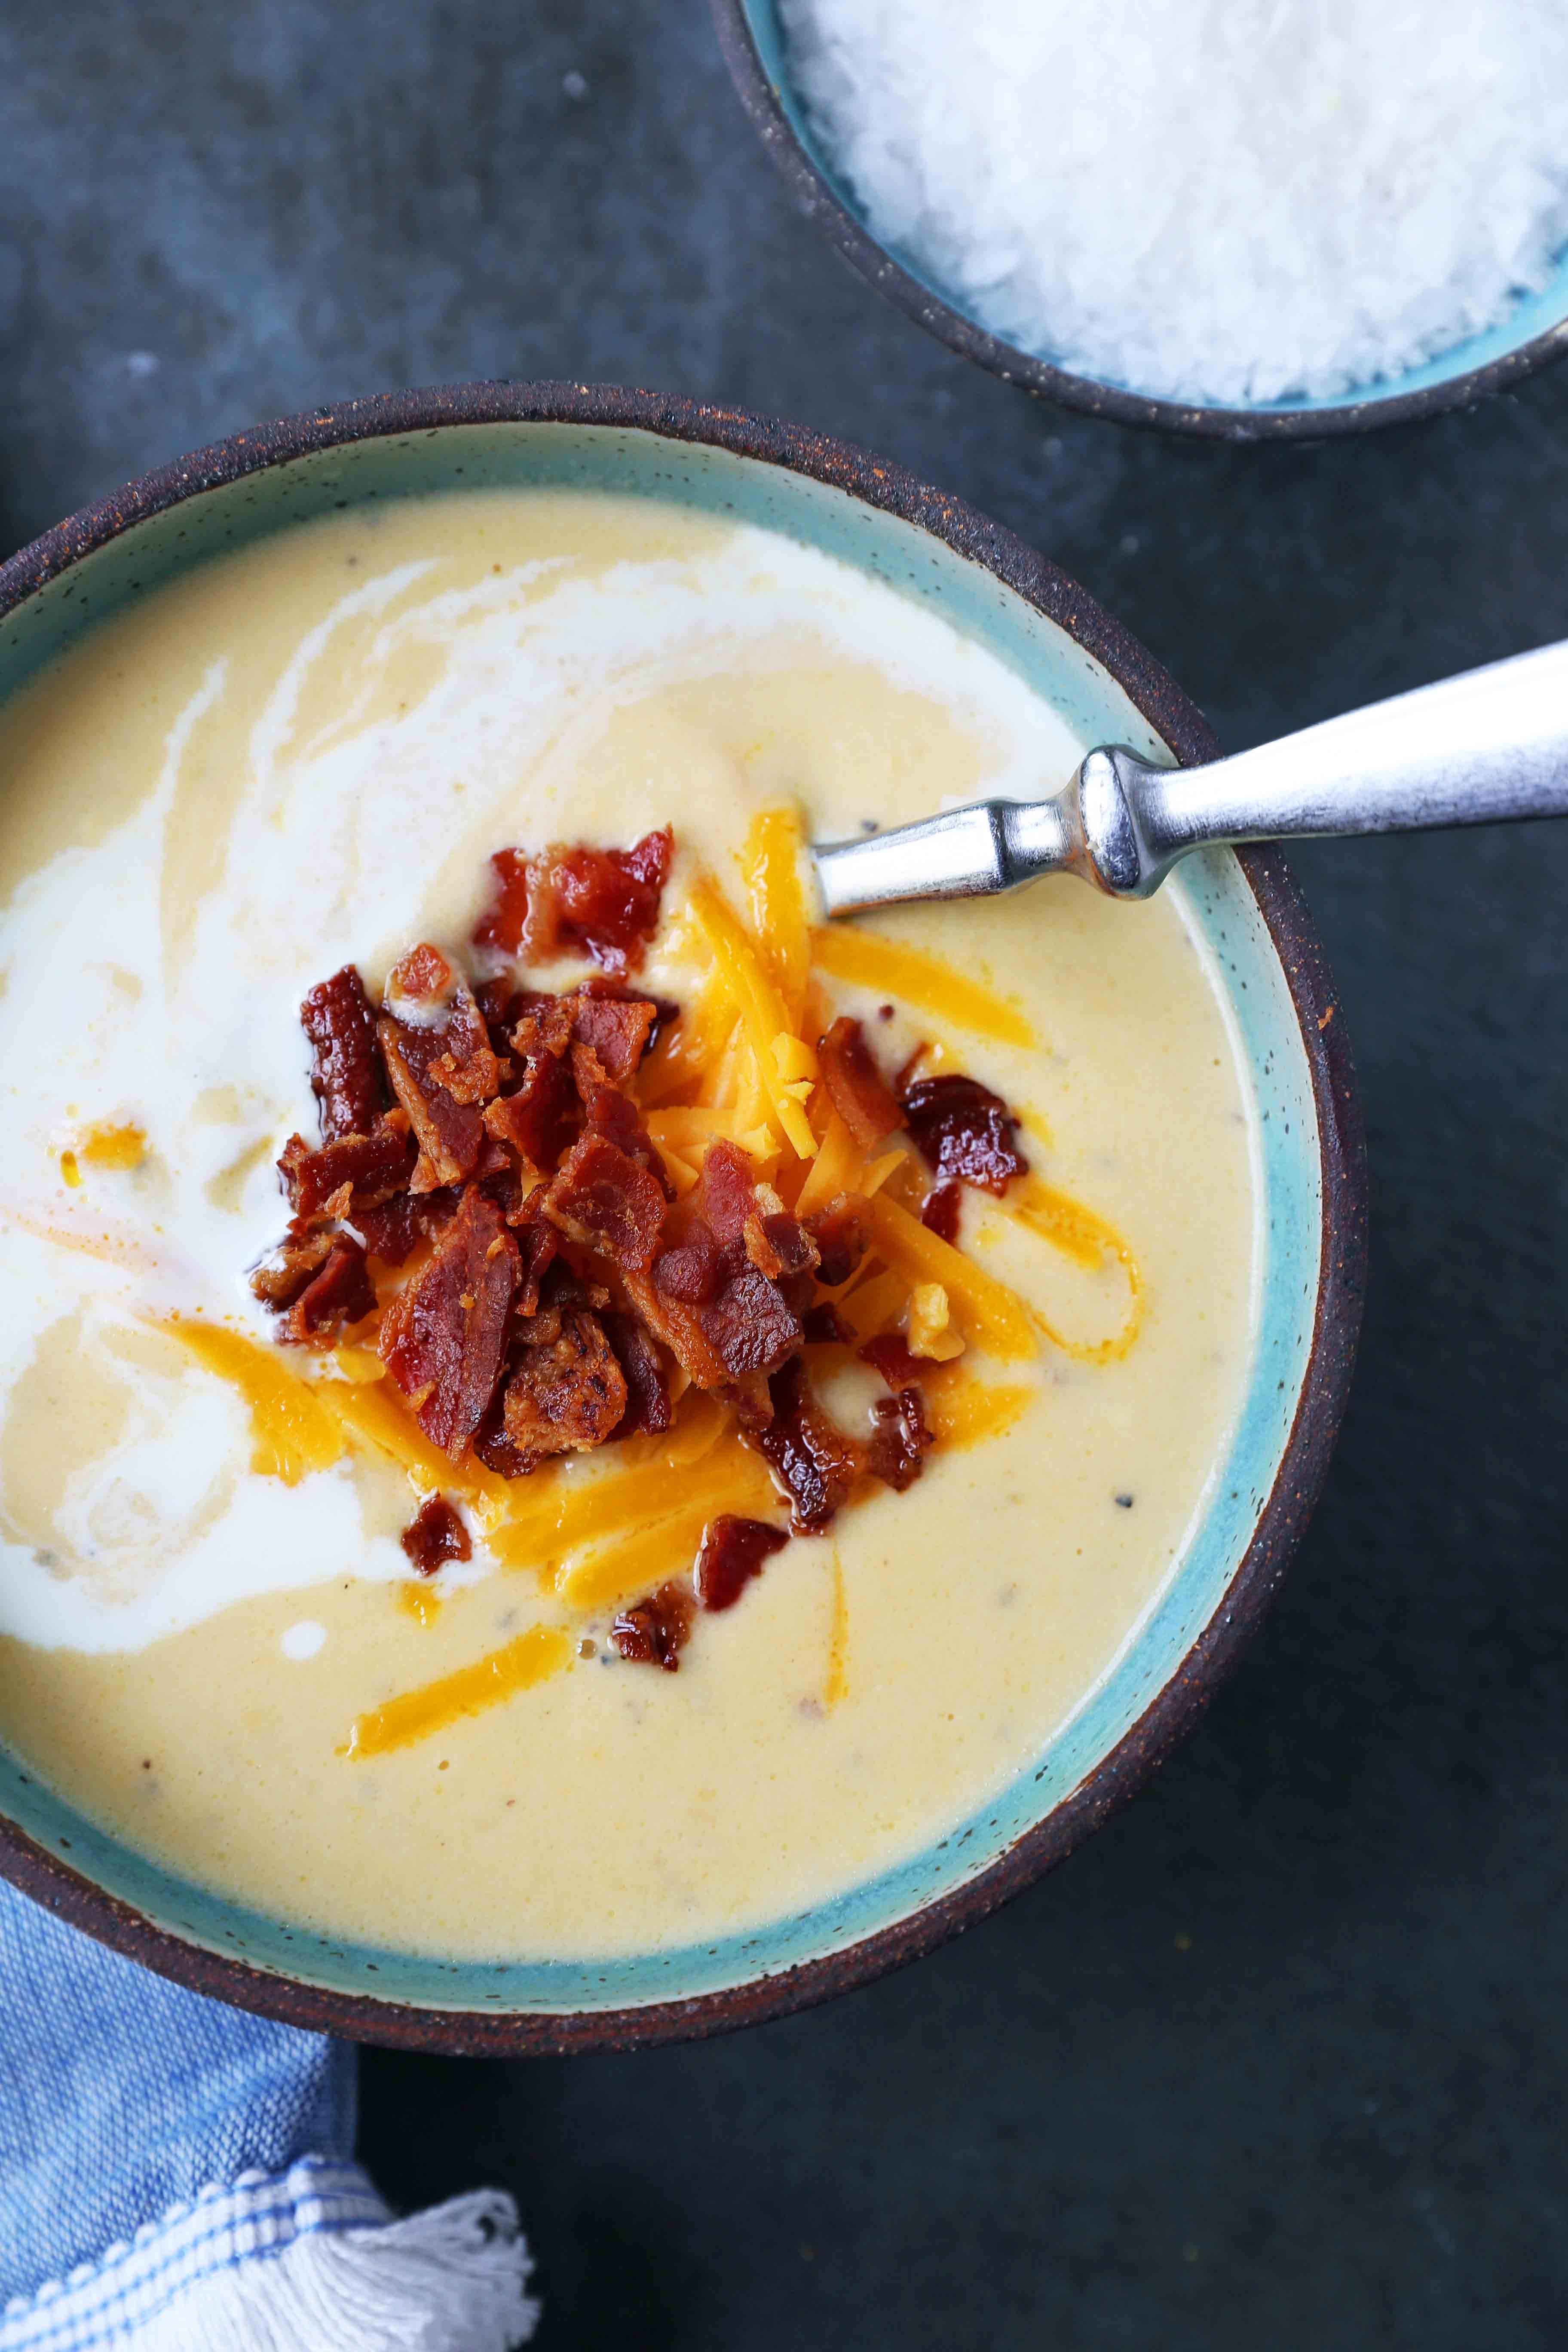 Cheesy Cauliflower Soup. A creamy cheesy cauliflower soup made with fresh cauliflower, cream, sharp cheddar cheese, and bacon. A velvety smooth cream of cauliflower soup will become a winter staple in your home! www.modernhoney.com #cauliflowersoup #cheesycauliflowersoup #creamofcauliflowersoup #soup #souprecipes